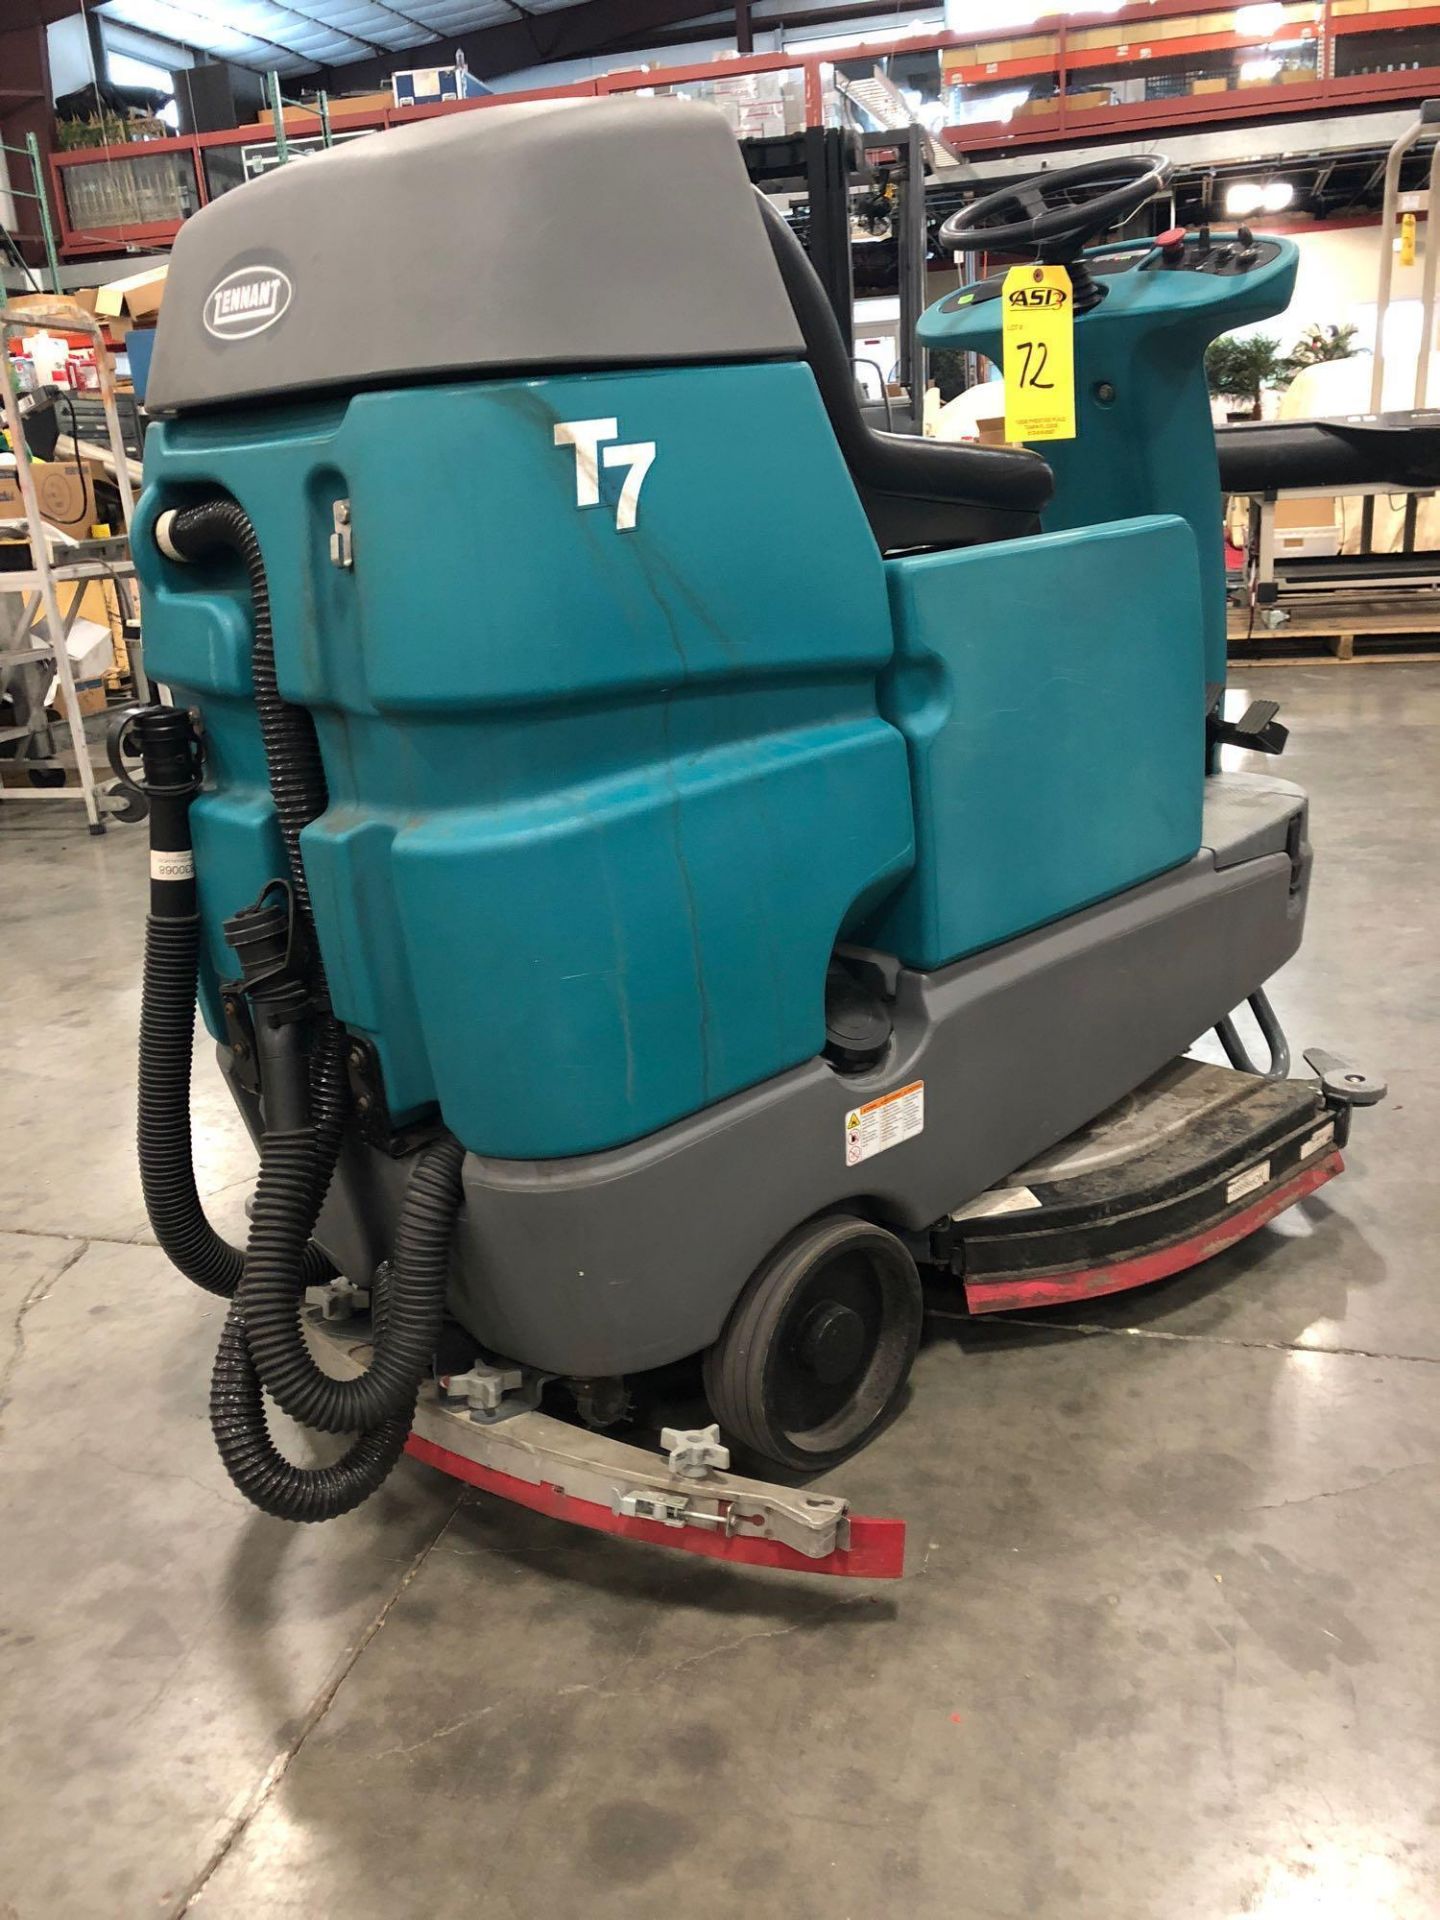 2015 TENNANT T7 ELECTRIC FLOOR SCRUBBER, BUILT IN BATTERY CHARGER, 872 HOURS SHOWING, RUNS - Image 2 of 9